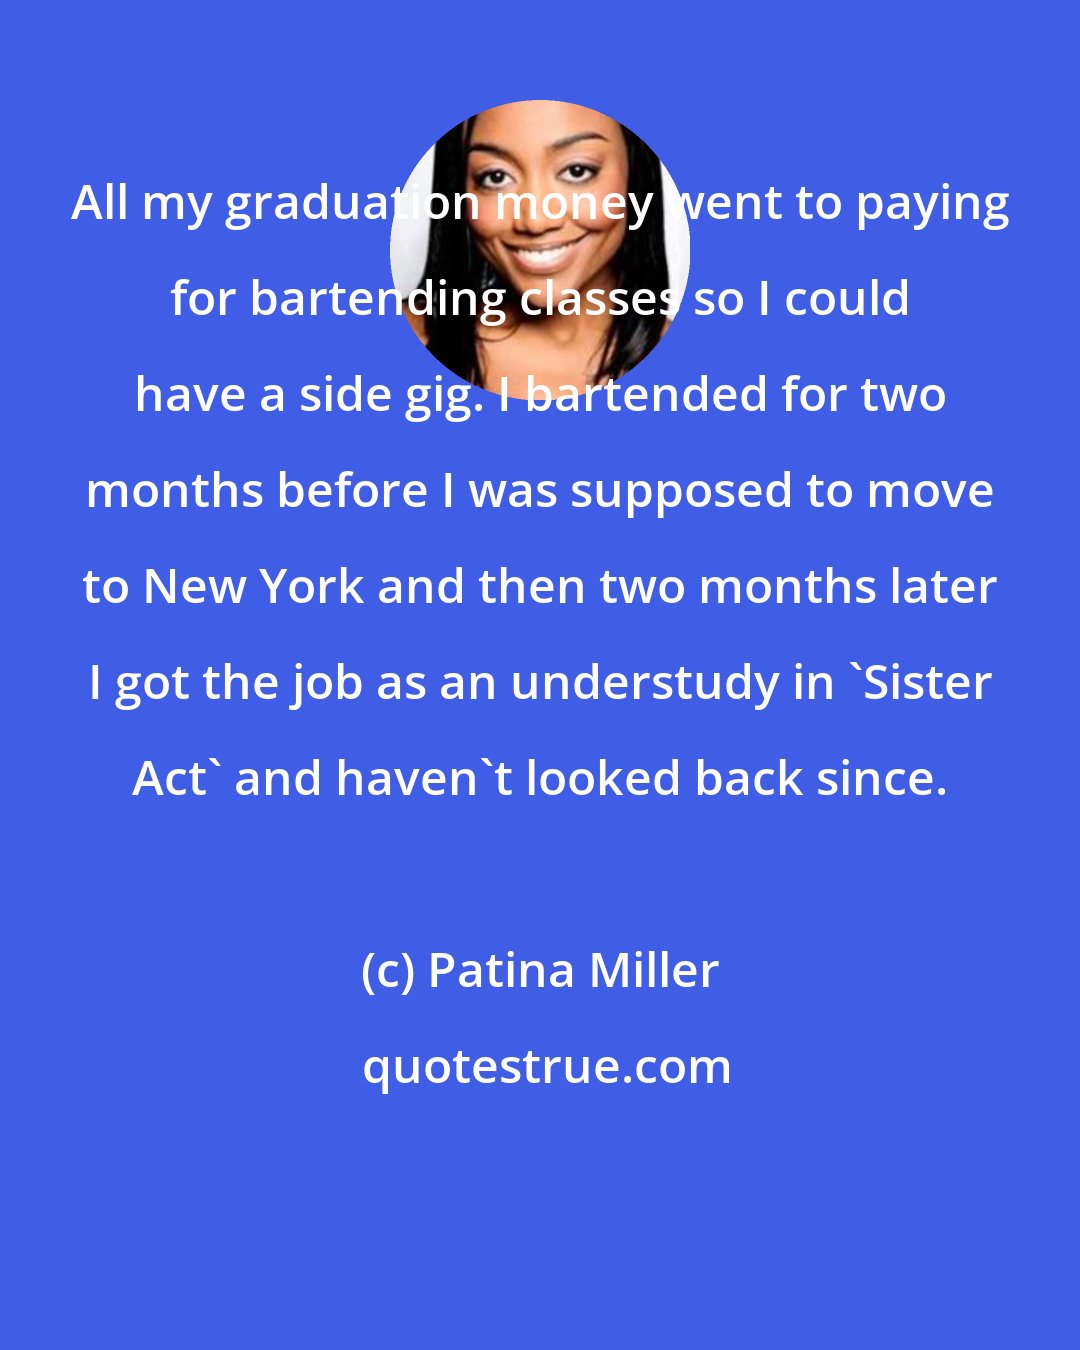 Patina Miller: All my graduation money went to paying for bartending classes so I could have a side gig. I bartended for two months before I was supposed to move to New York and then two months later I got the job as an understudy in 'Sister Act' and haven't looked back since.